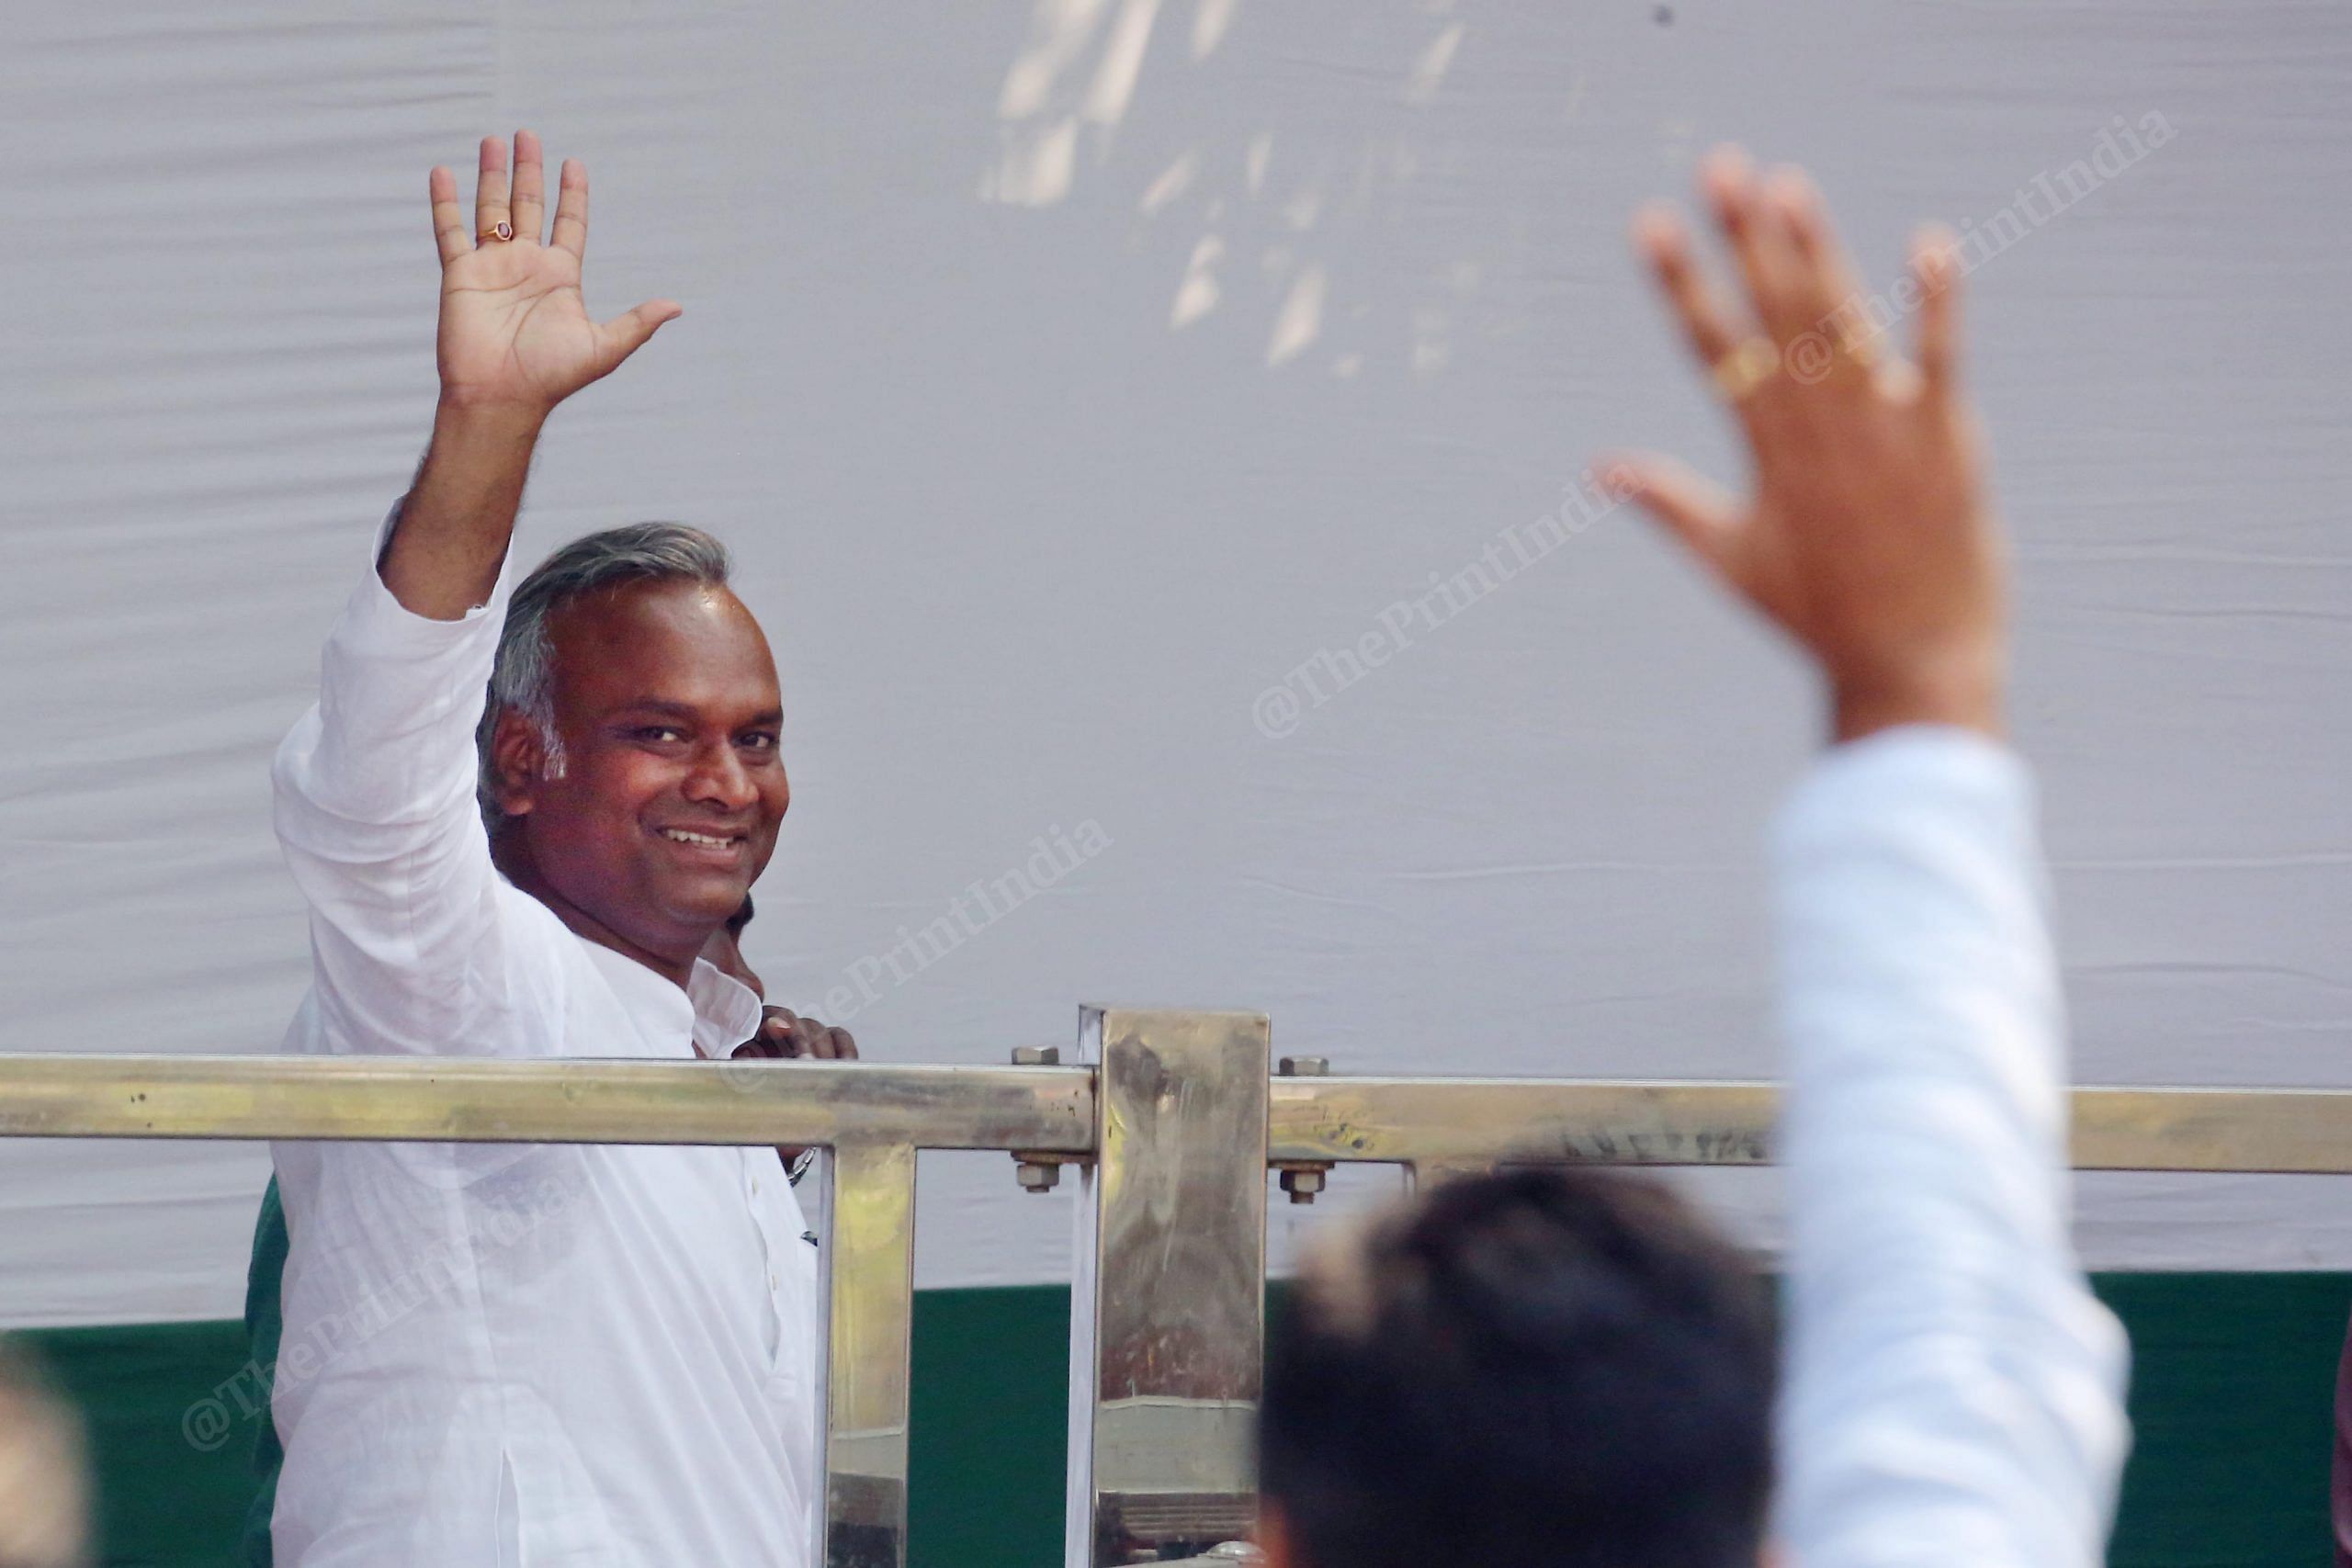 Newly Elected Congress President Mallikarjun kharge son Priyank Kharge wave to party leaders during a ceremony for presentation of certificate of election to the former, at AICC Headquarters | Praveen Jain | ThePrint